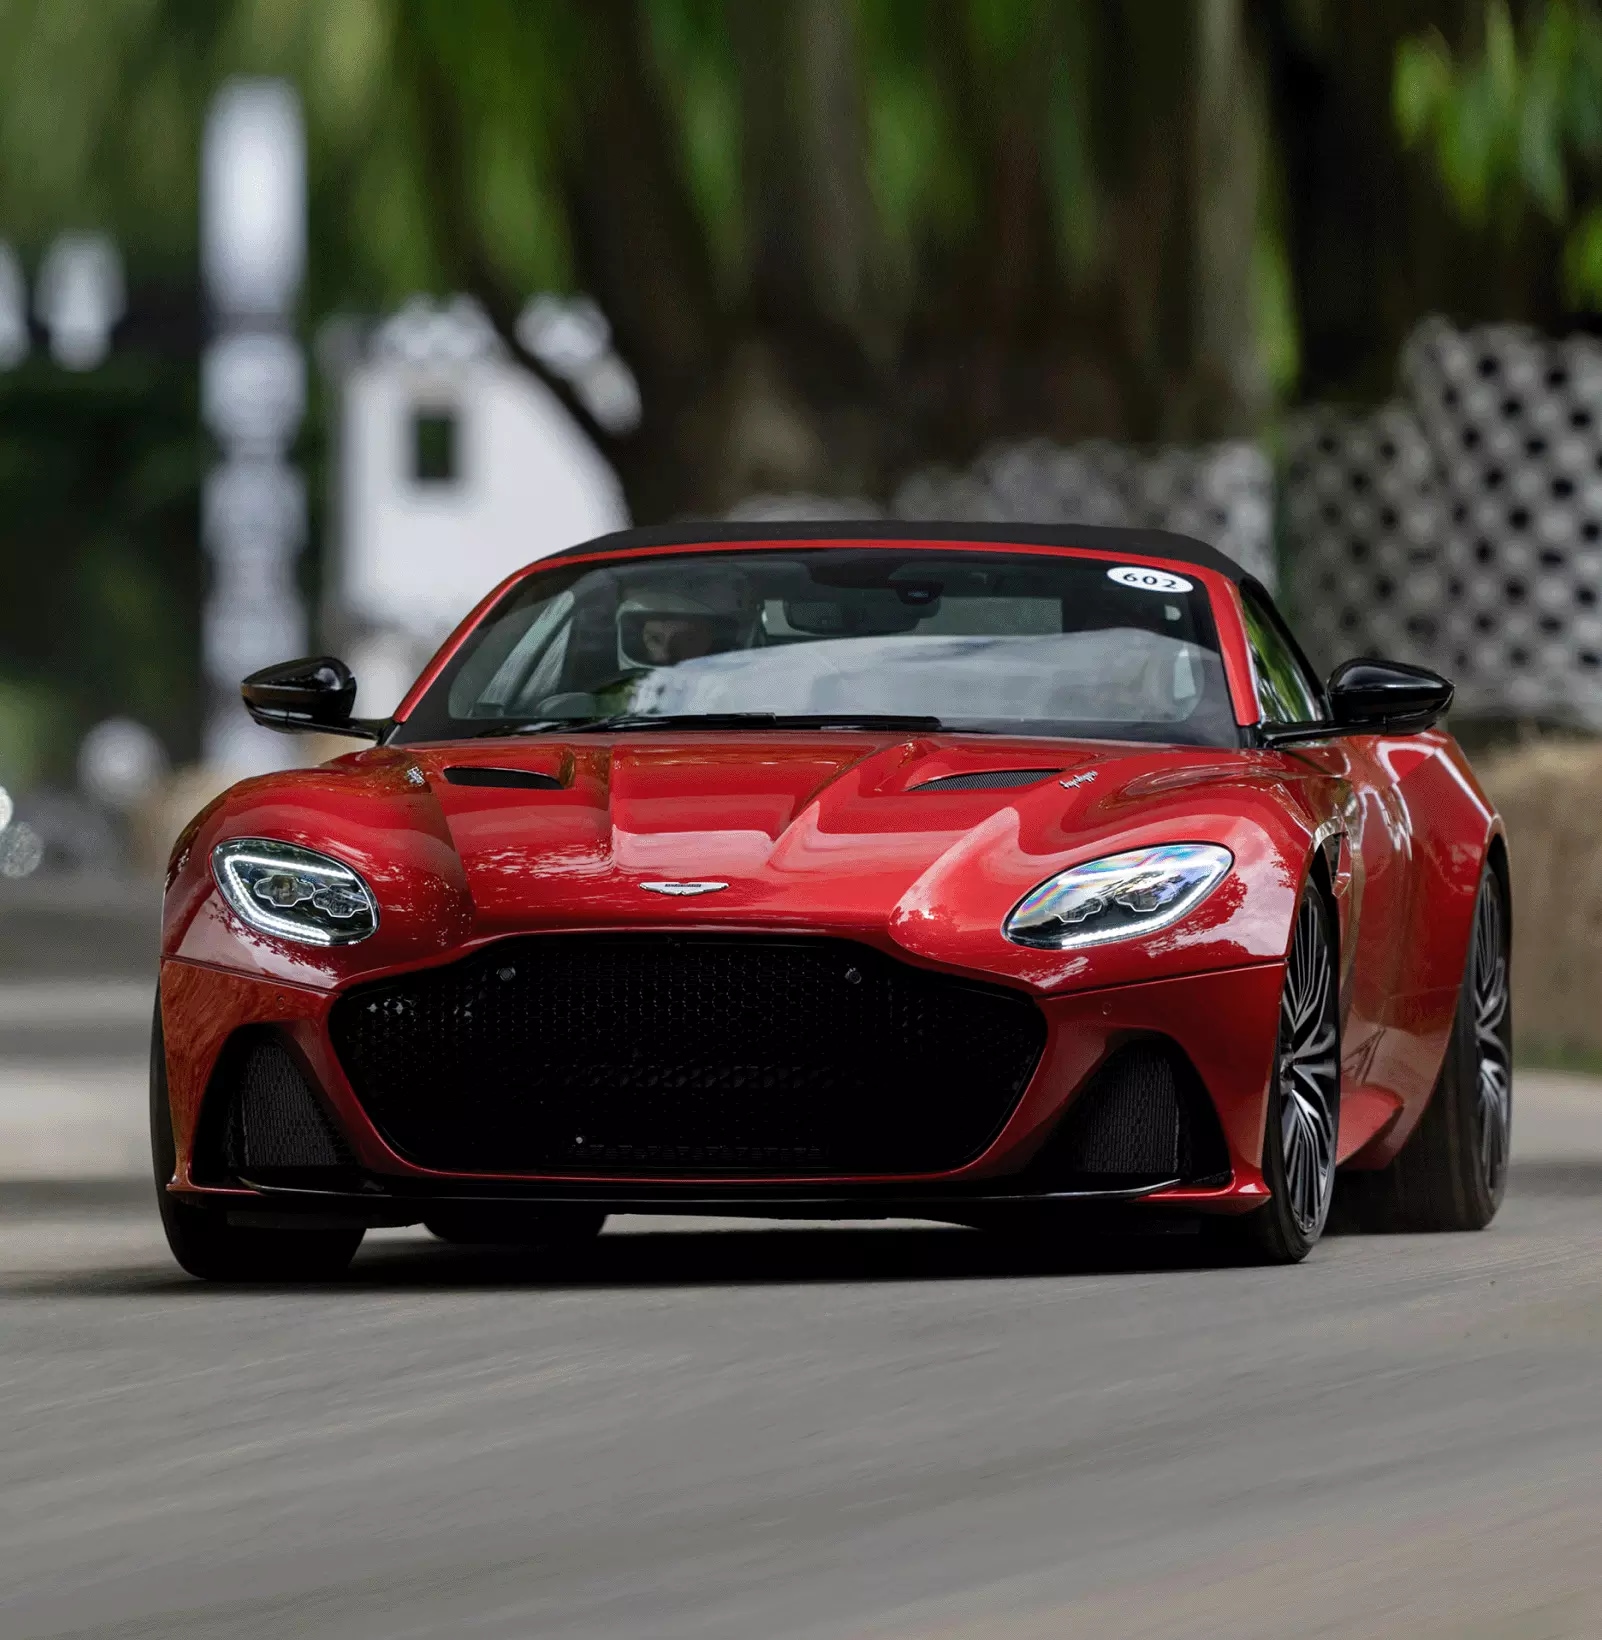 Front view of cherry red Aston Martin driven by racing driver